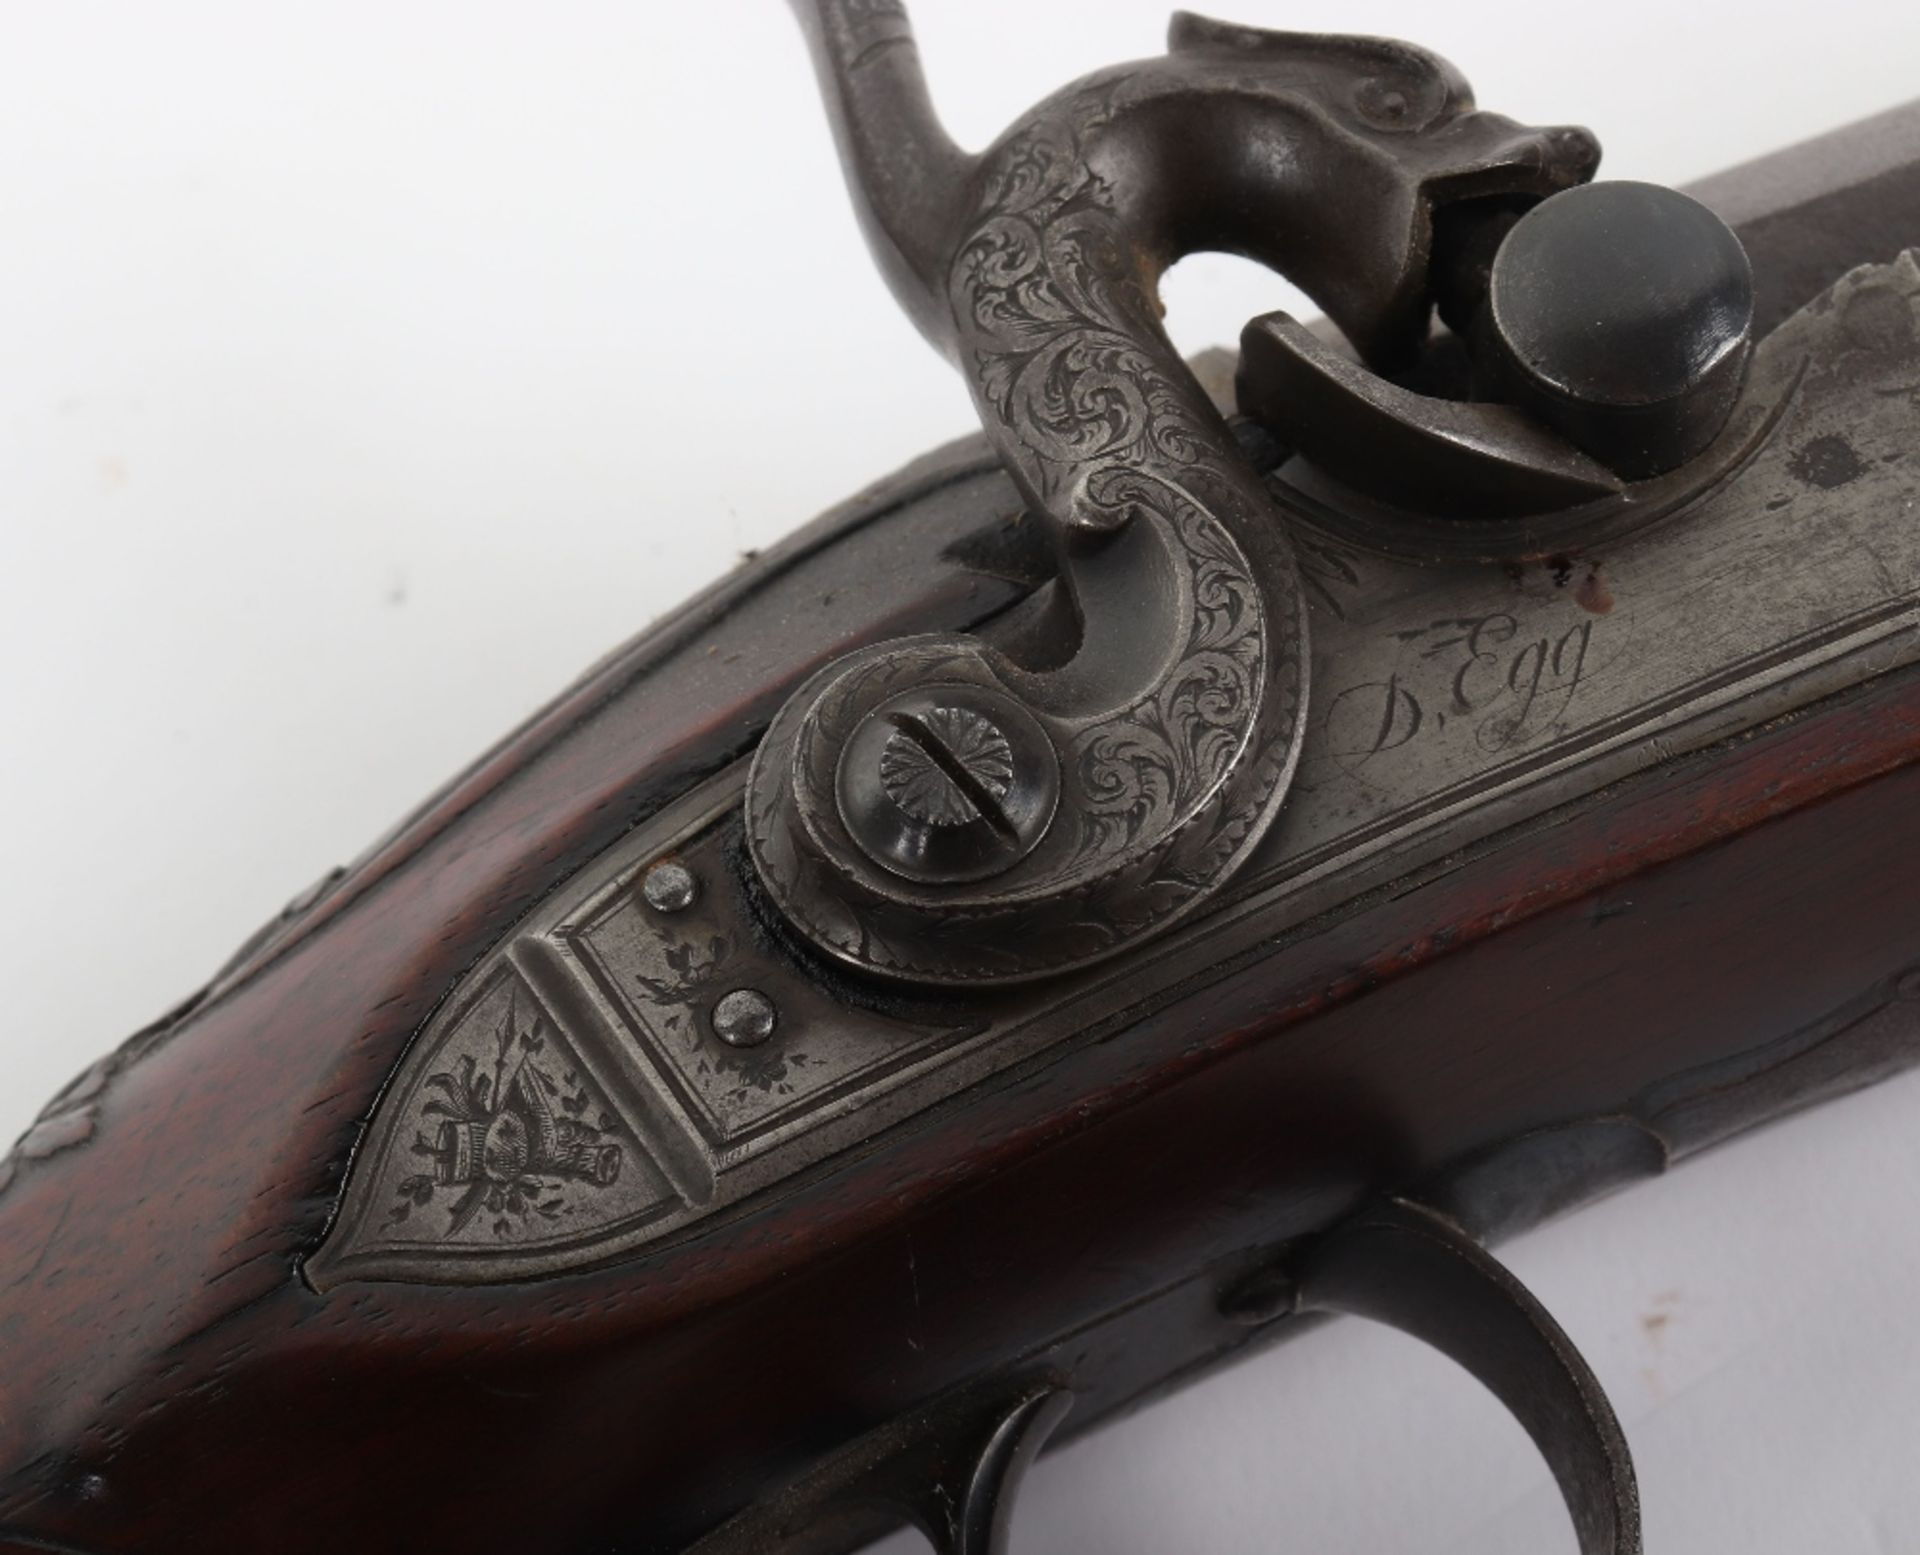 16-Bore Percussion Sporting Gun by D. Egg, Late 18th Century - Image 4 of 15